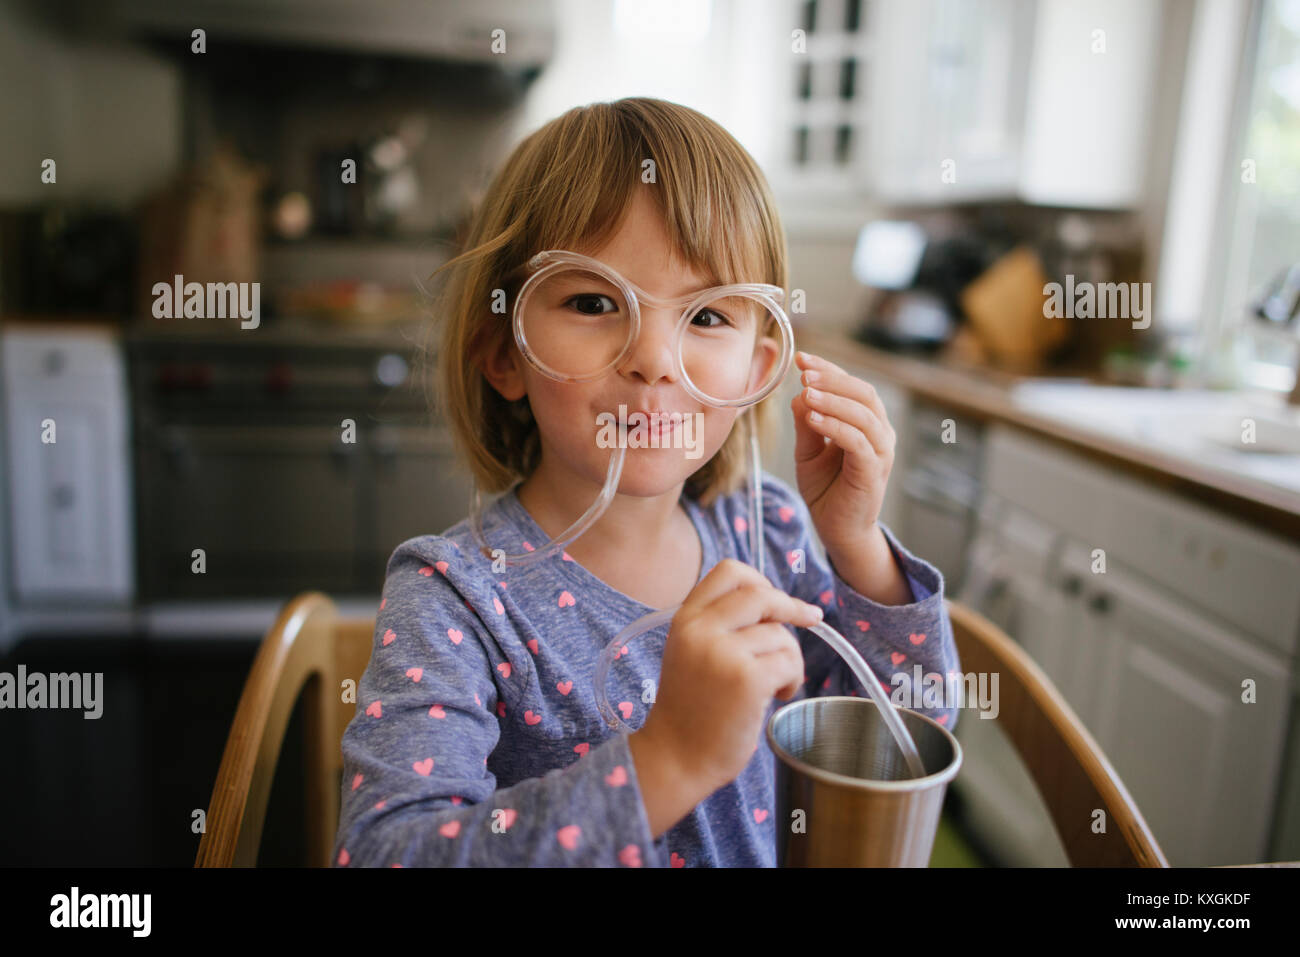 Portrait of cute girl wearing novelty glasses at home Stock Photo